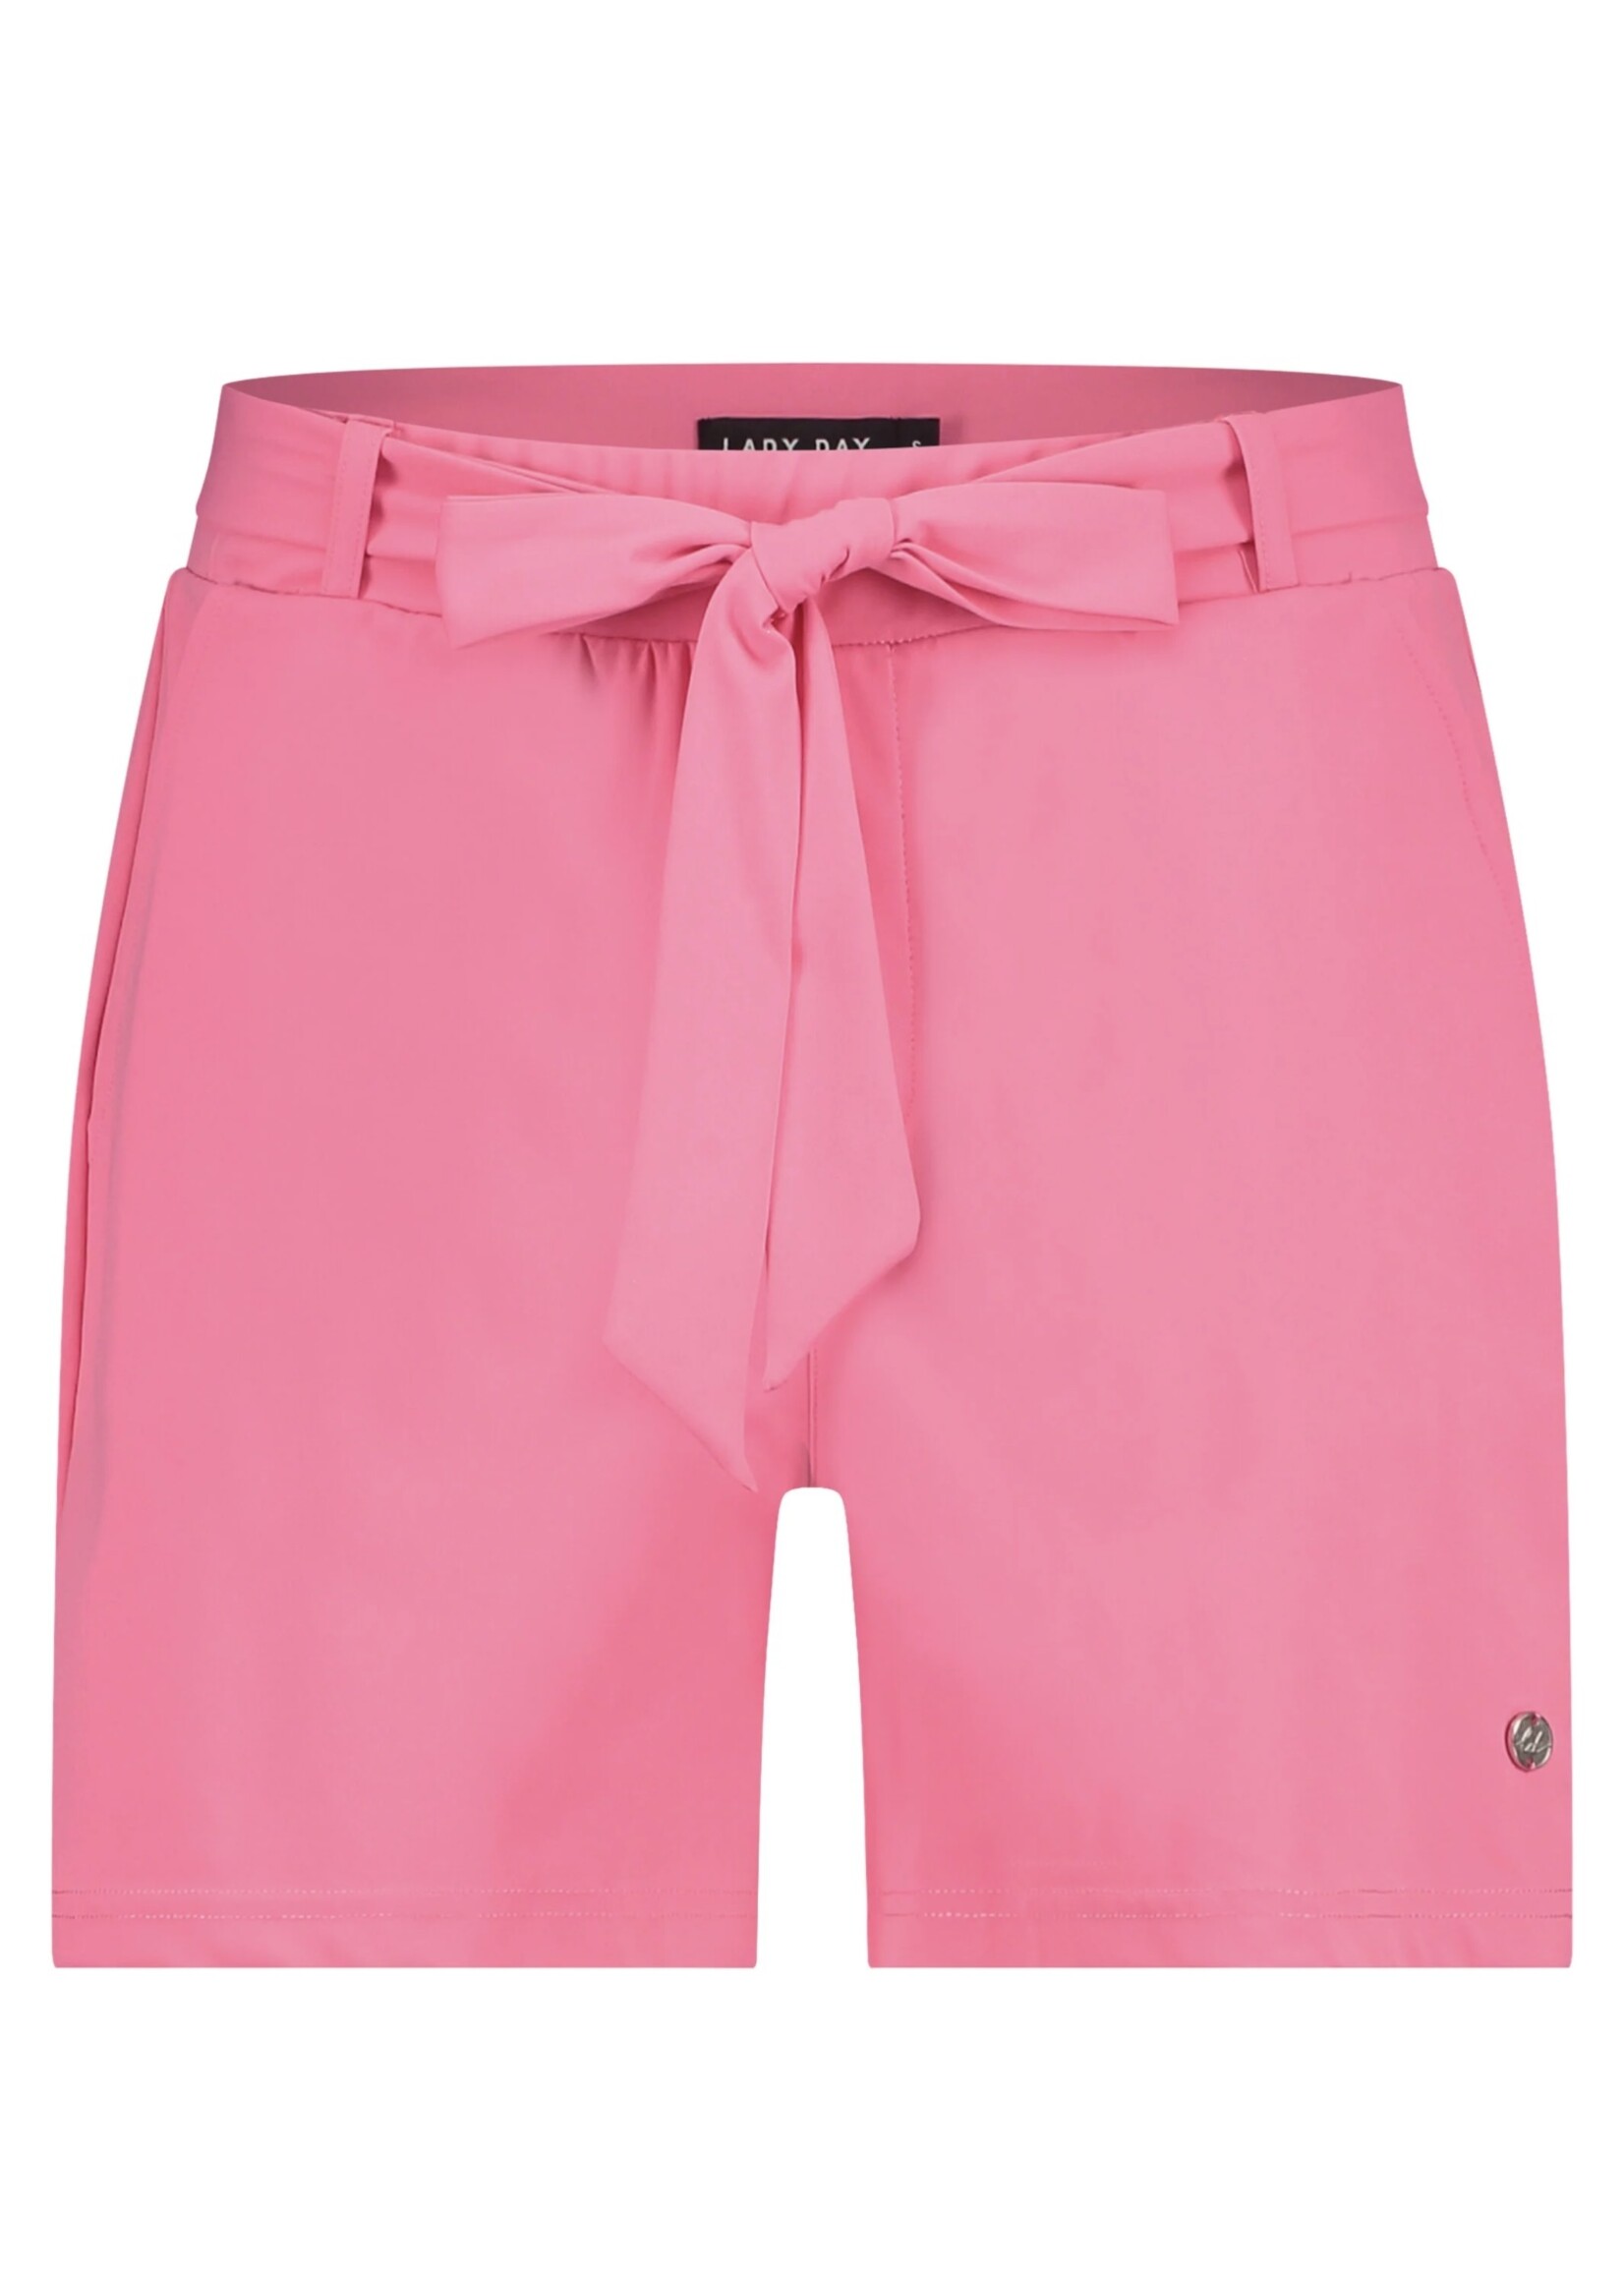 Lady Day Lady Day - Shorty - Short - Pebble, Hot pink